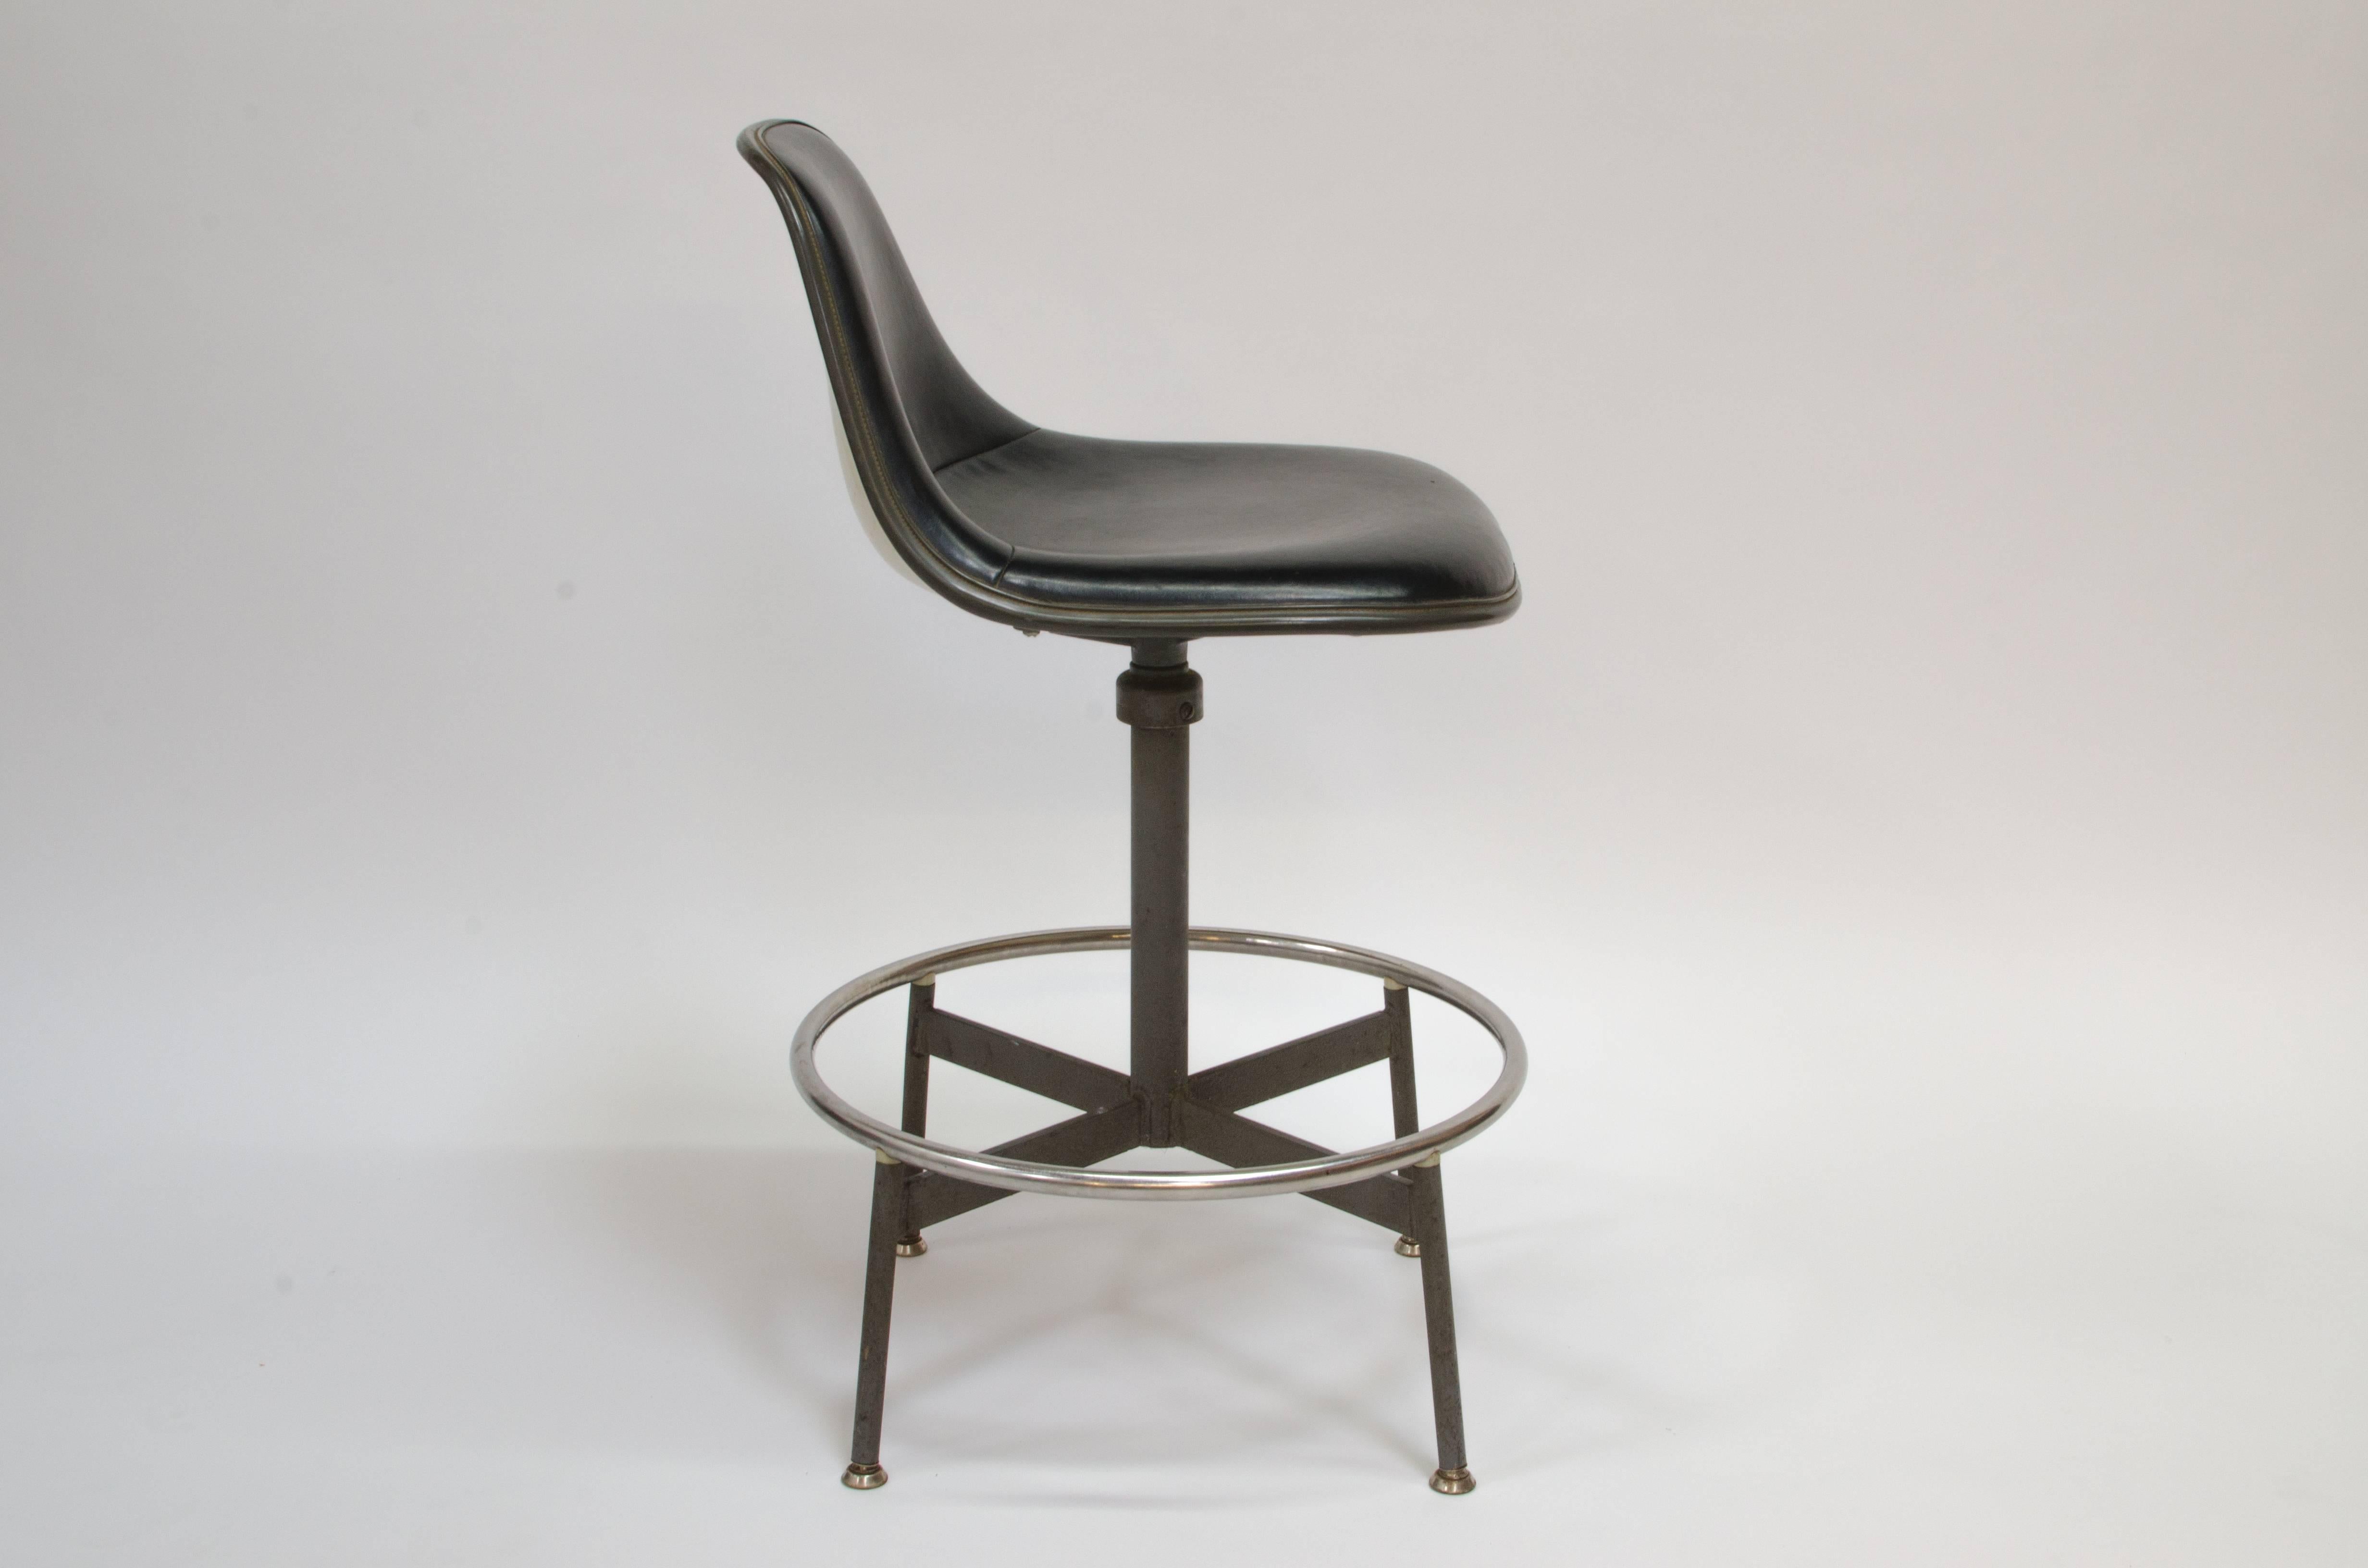 First generation drafting stool designed by Charles & Ray Eames for Herman Miller. Rarely seen combination features a short back parchment colored fiberglass shell with a black Naugahyde seat cover. The seat is height adjustable.